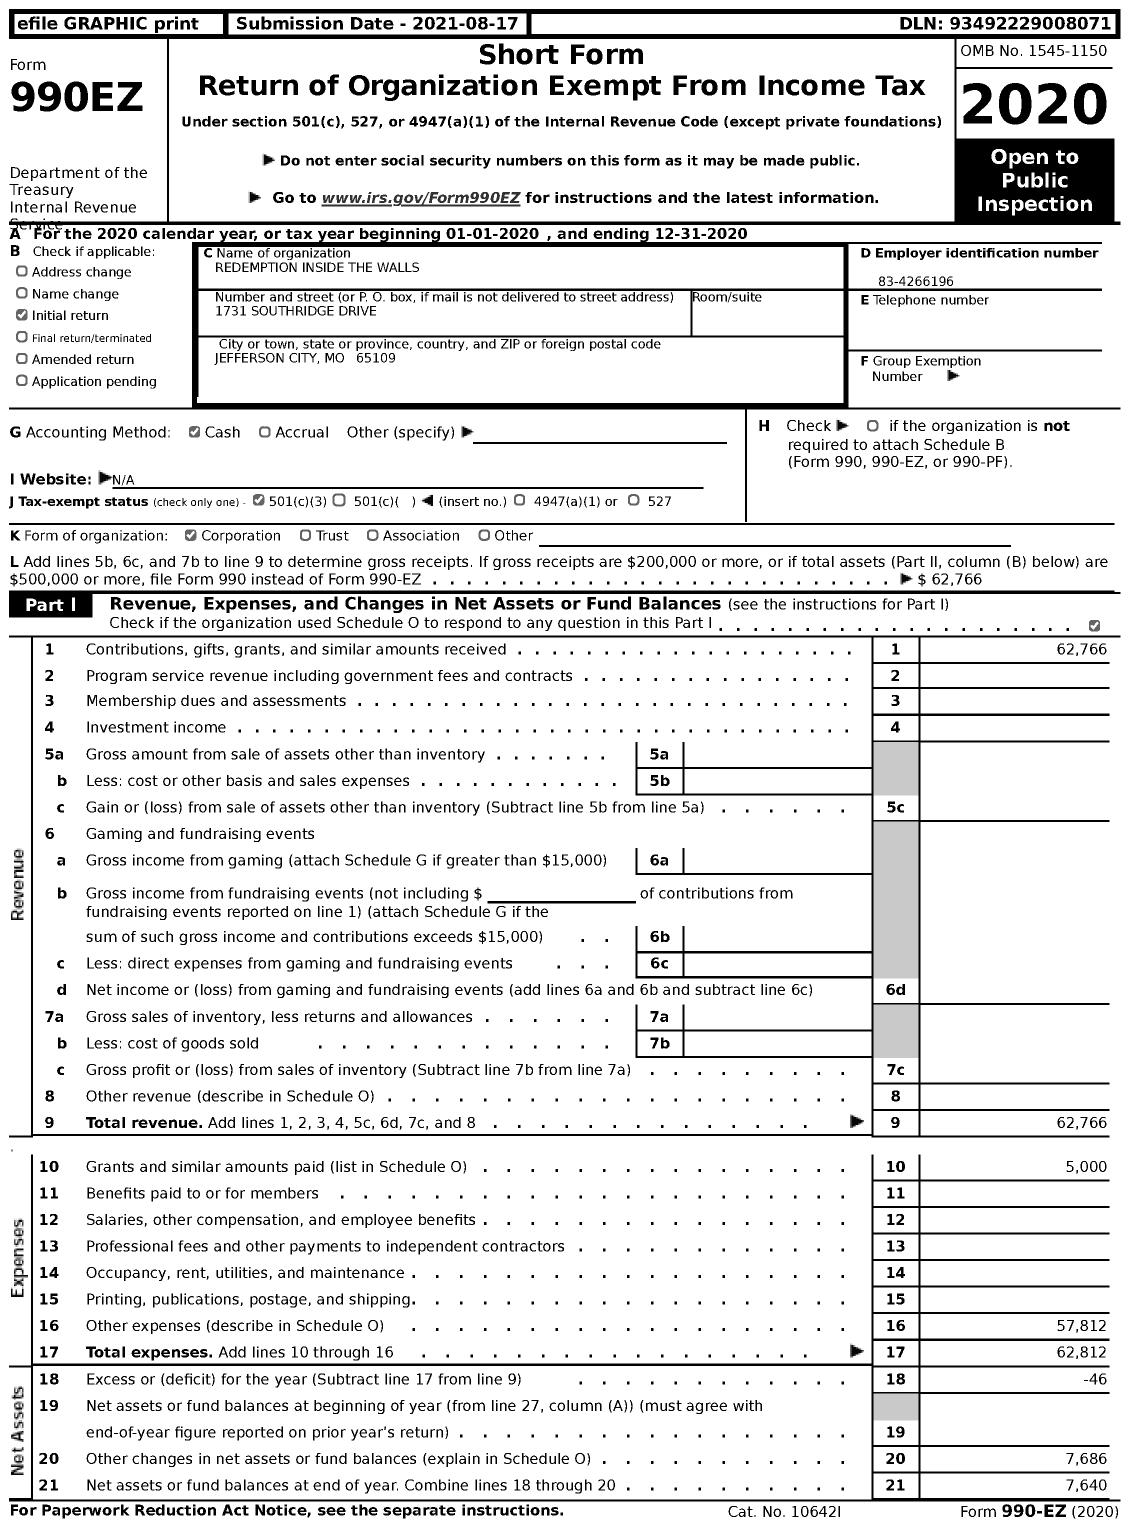 Image of first page of 2020 Form 990EZ for Redemption Inside the Walls